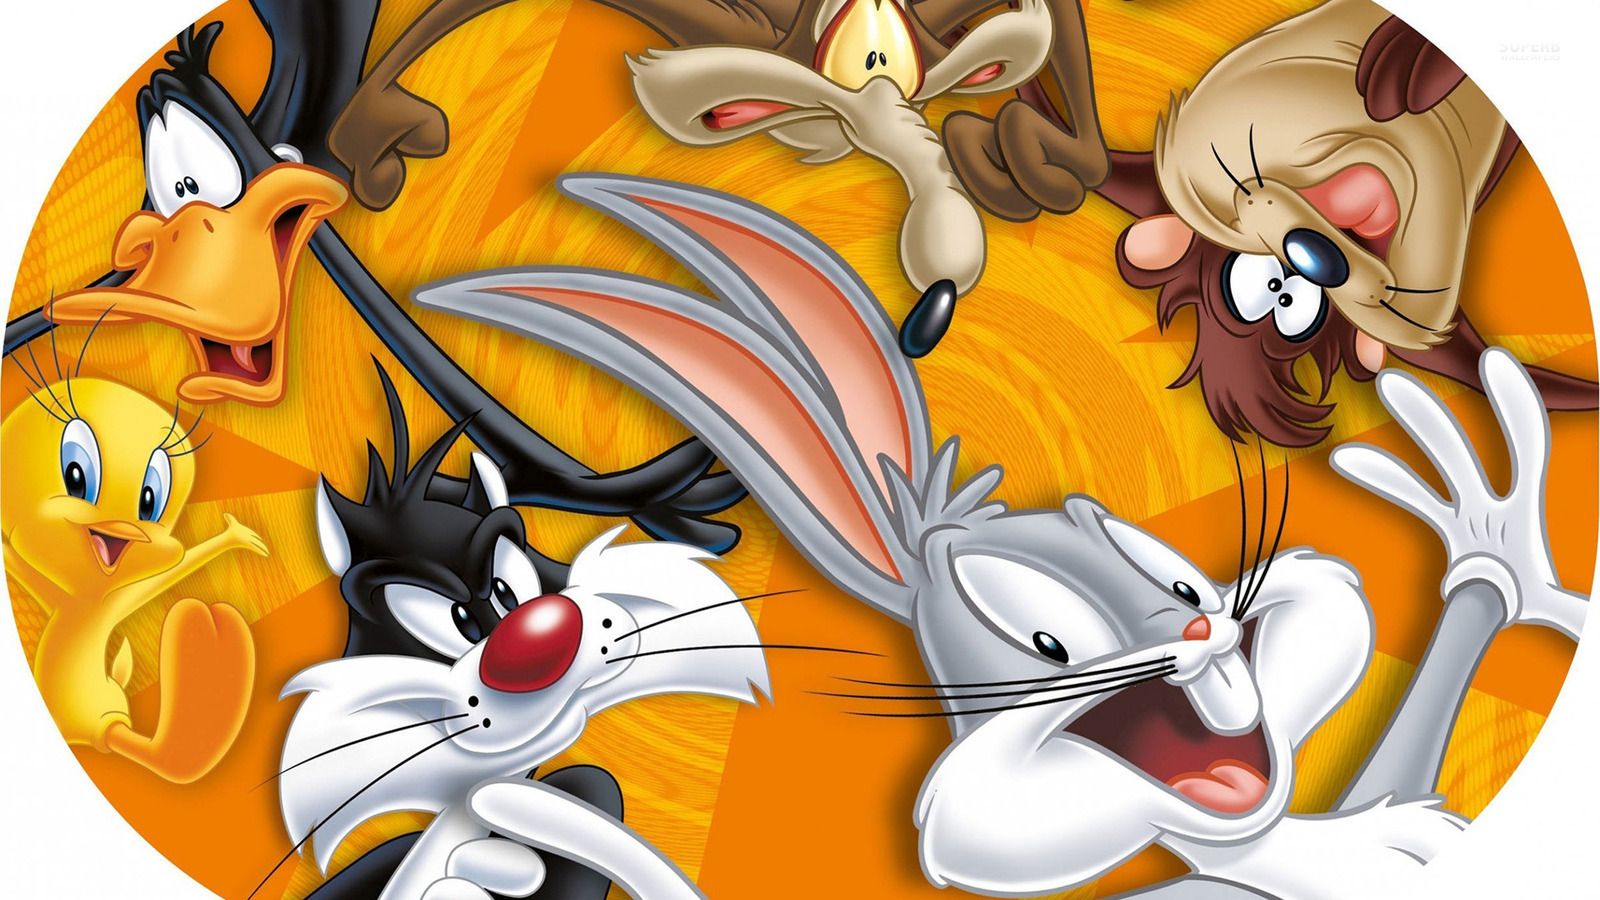 Looney Tunes - Looney Tunes Mouse Pad - HD Wallpaper 